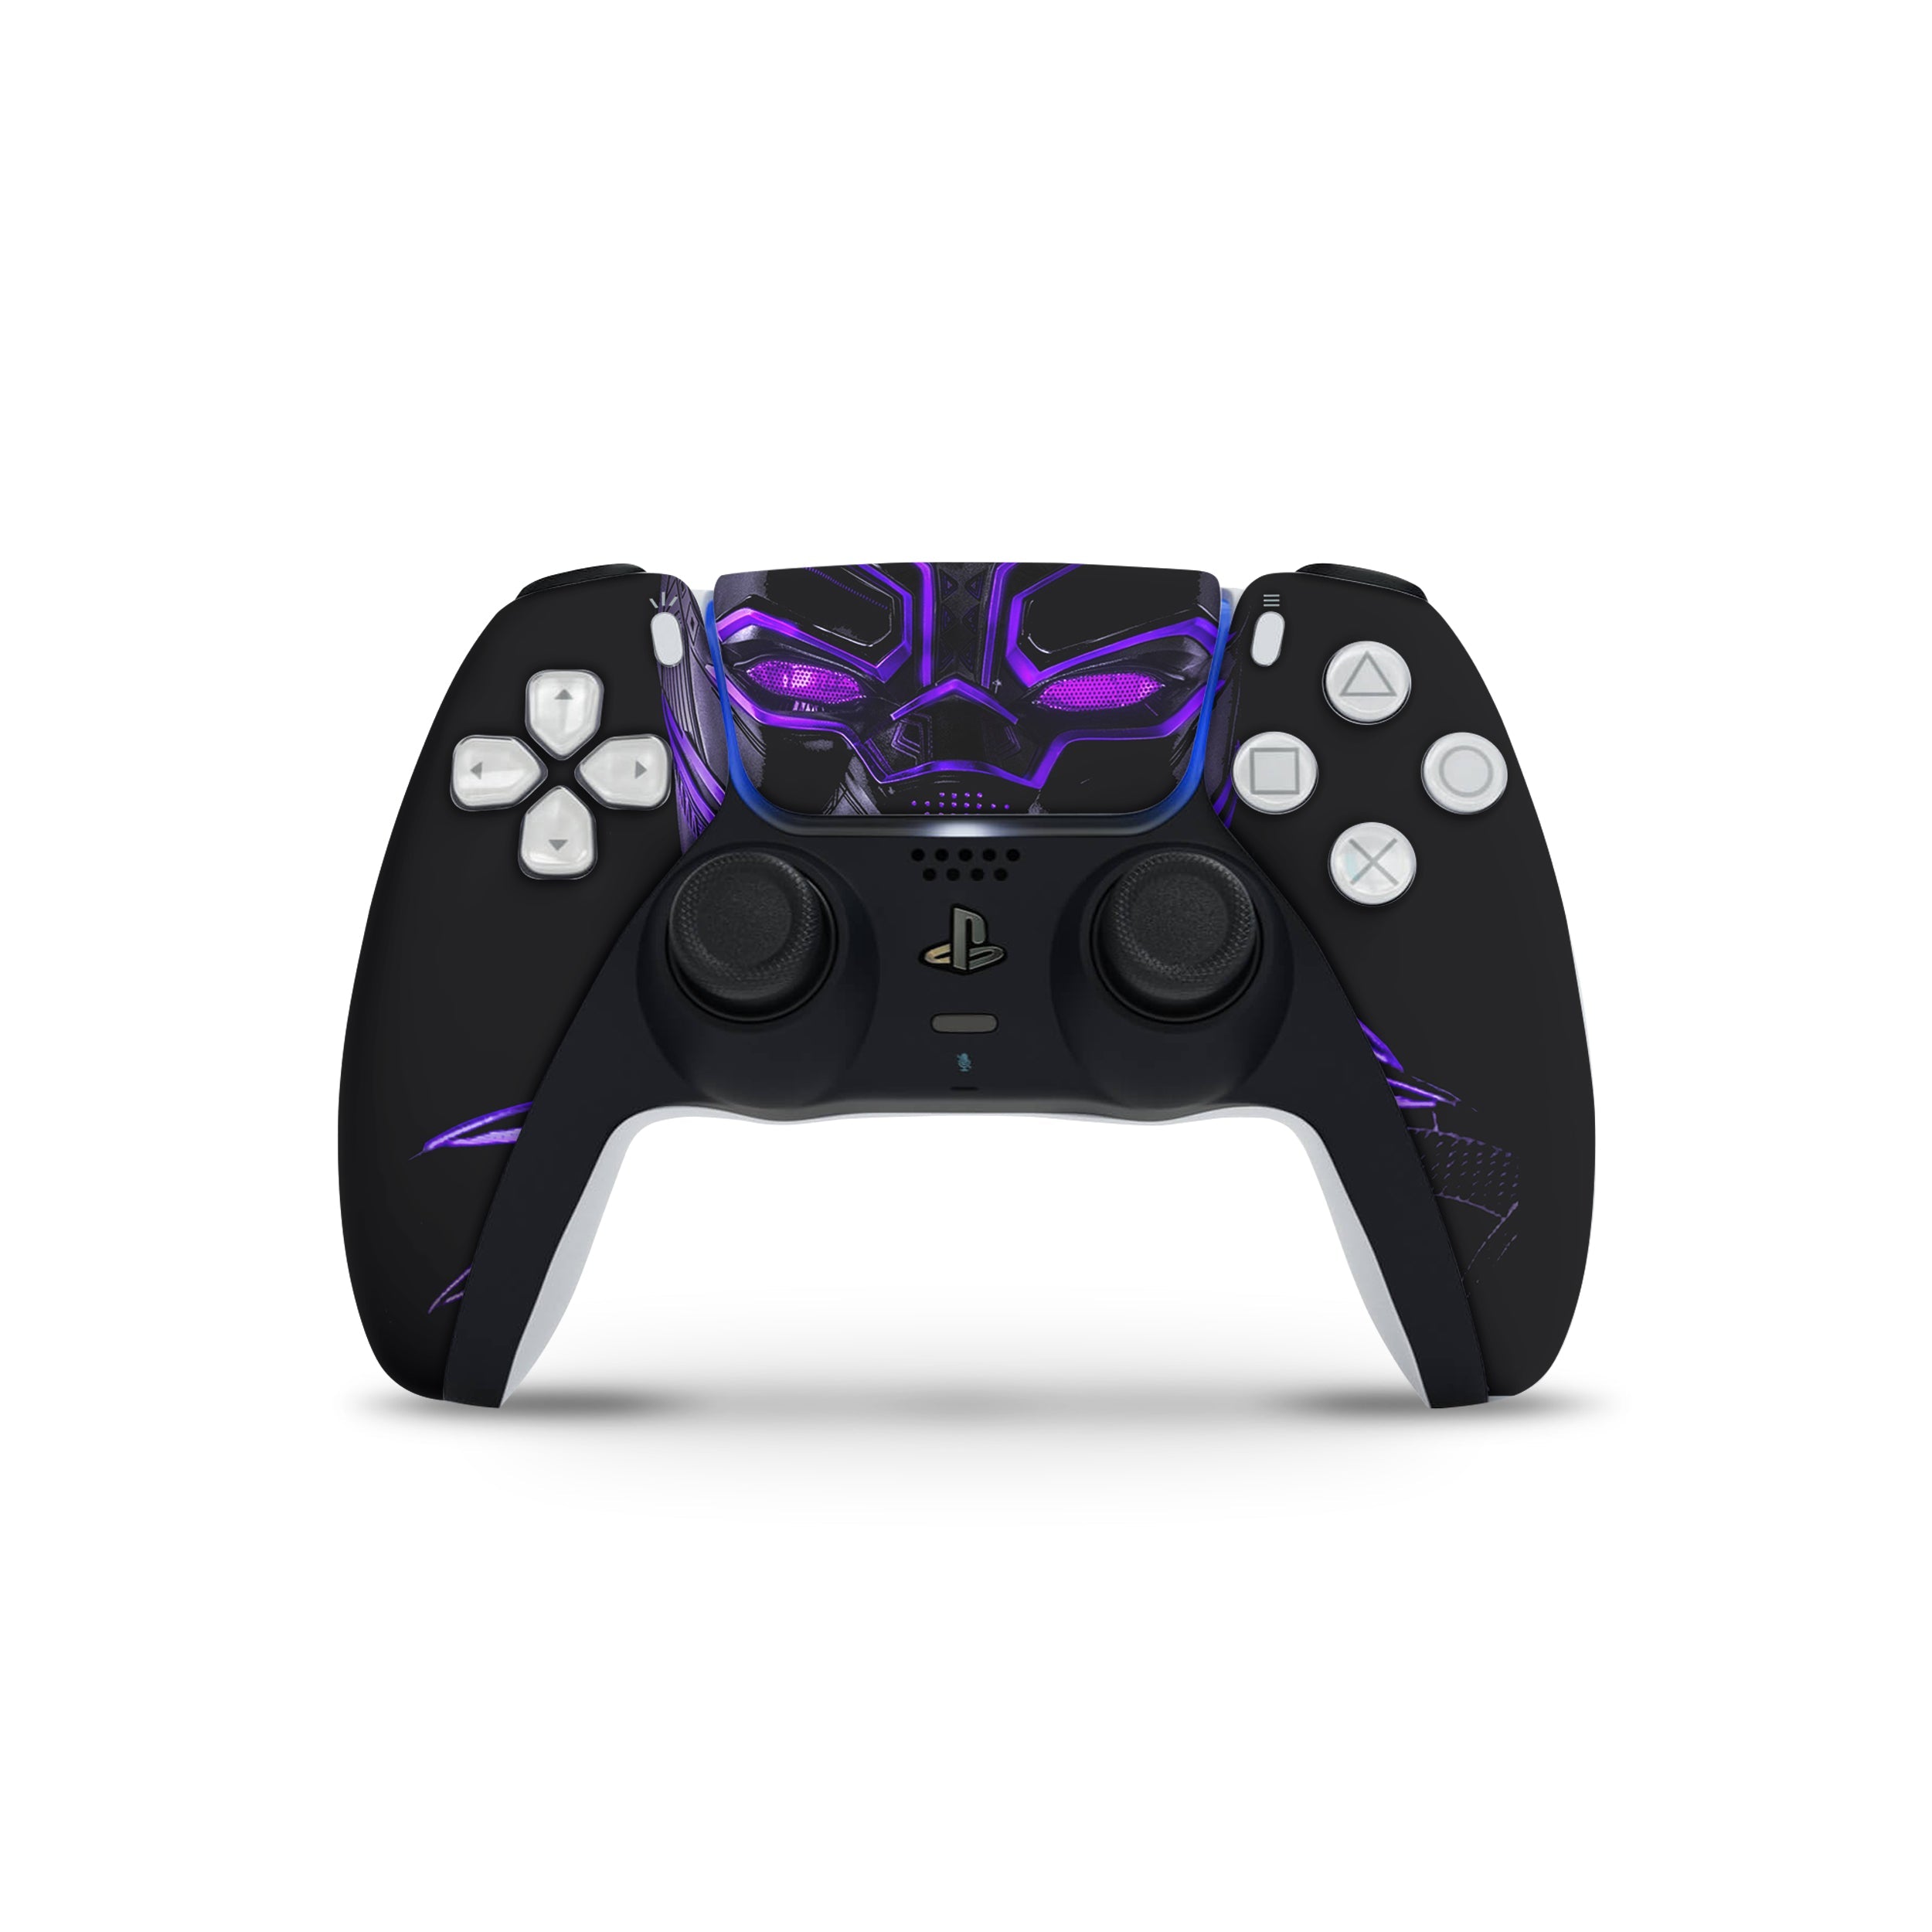 A video game skin featuring a Marvel Black Panther design for the PS5 DualSense Controller.